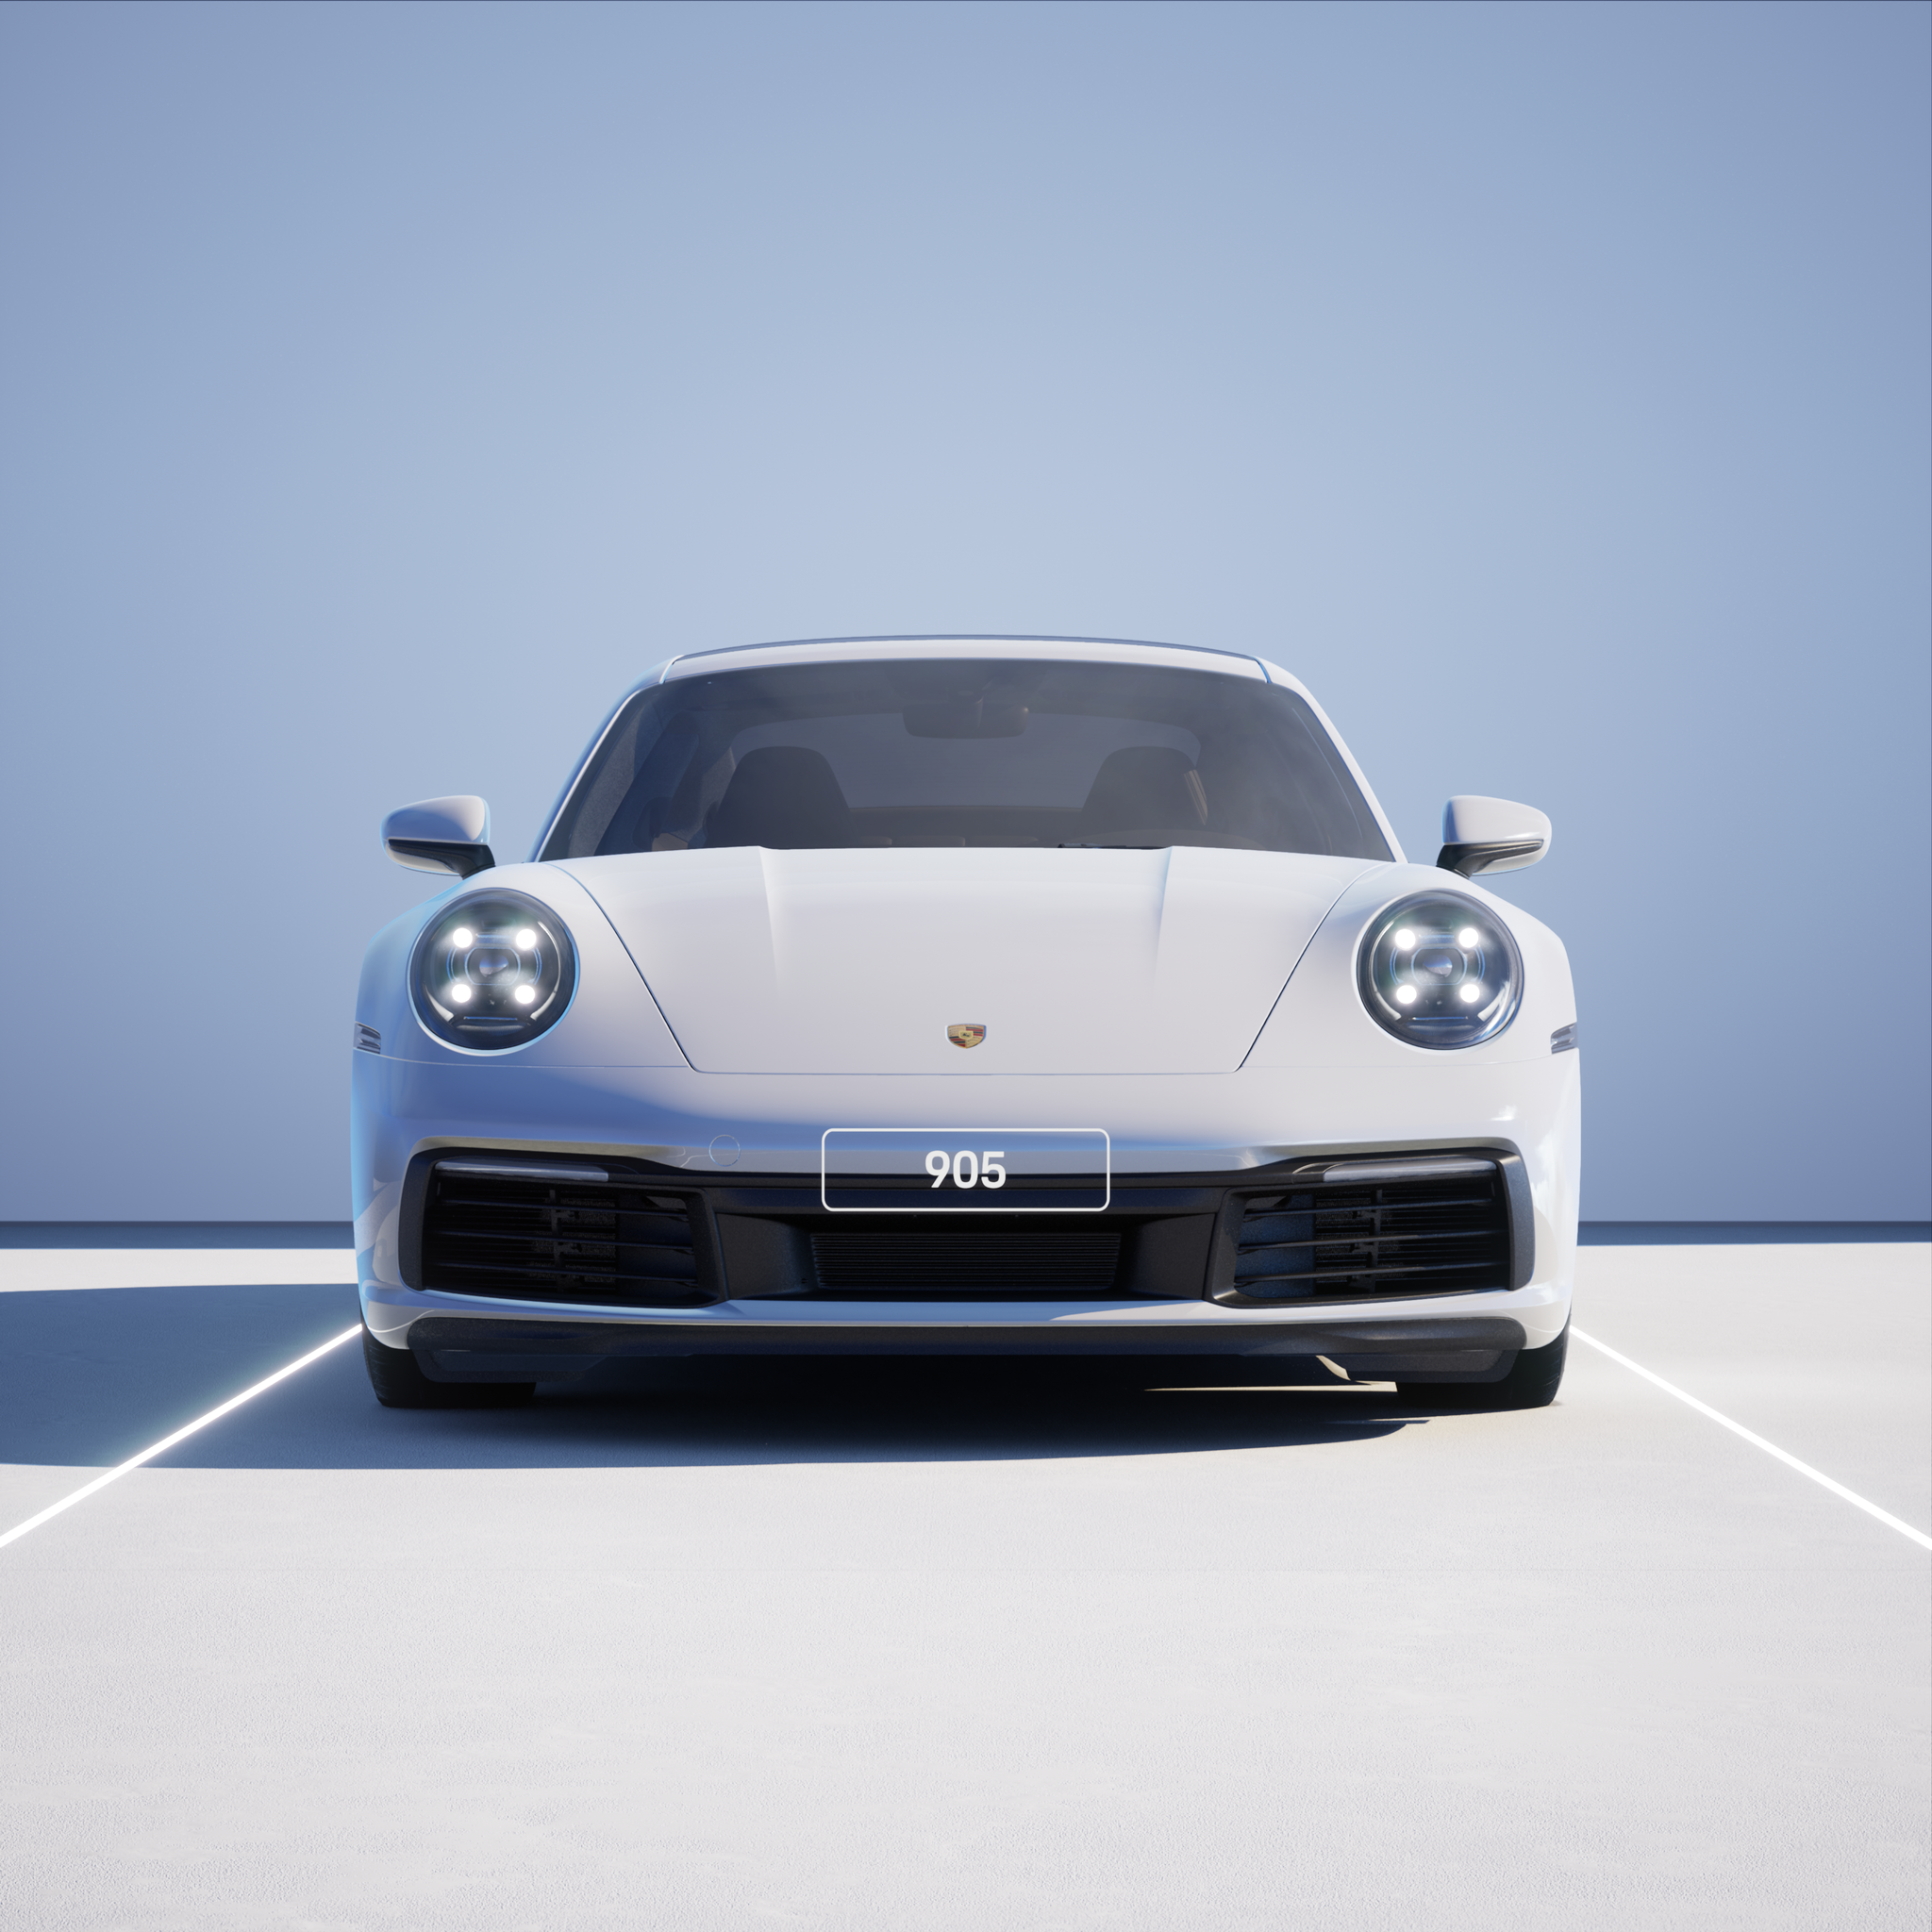 The PORSCHΞ 911 905 image in phase